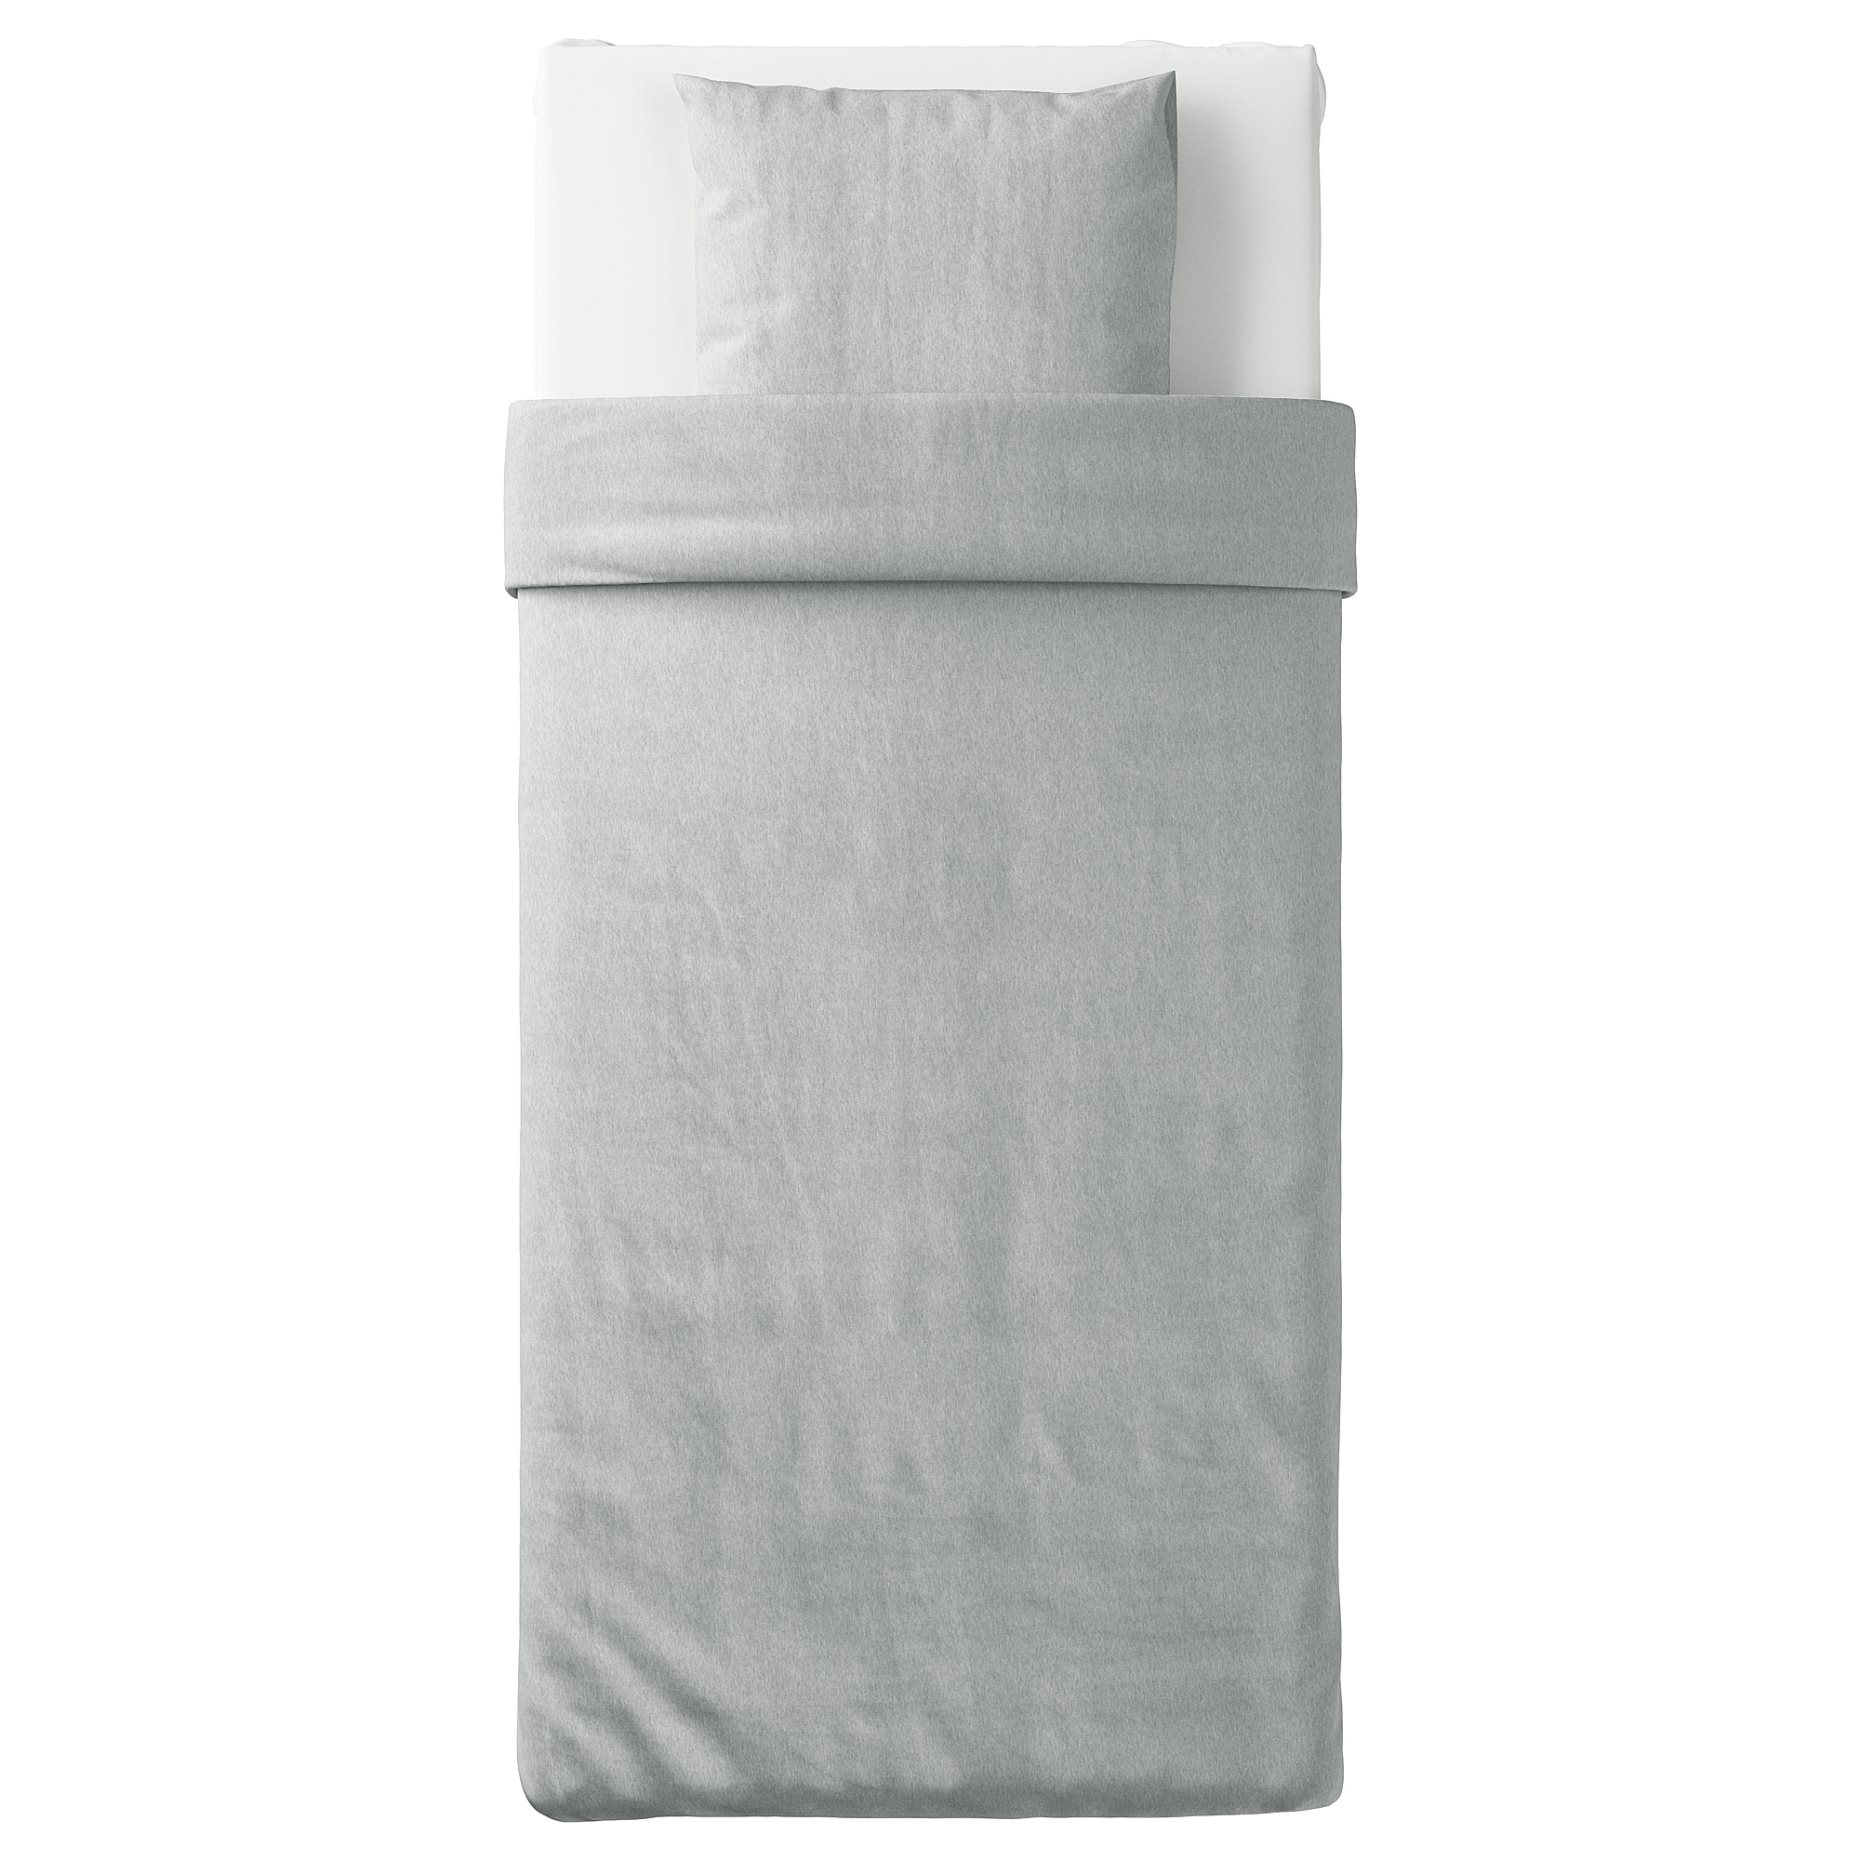 SPJUTVIAL, quilt cover and pillowcase, 150x200/50x60 cm, 804.797.90